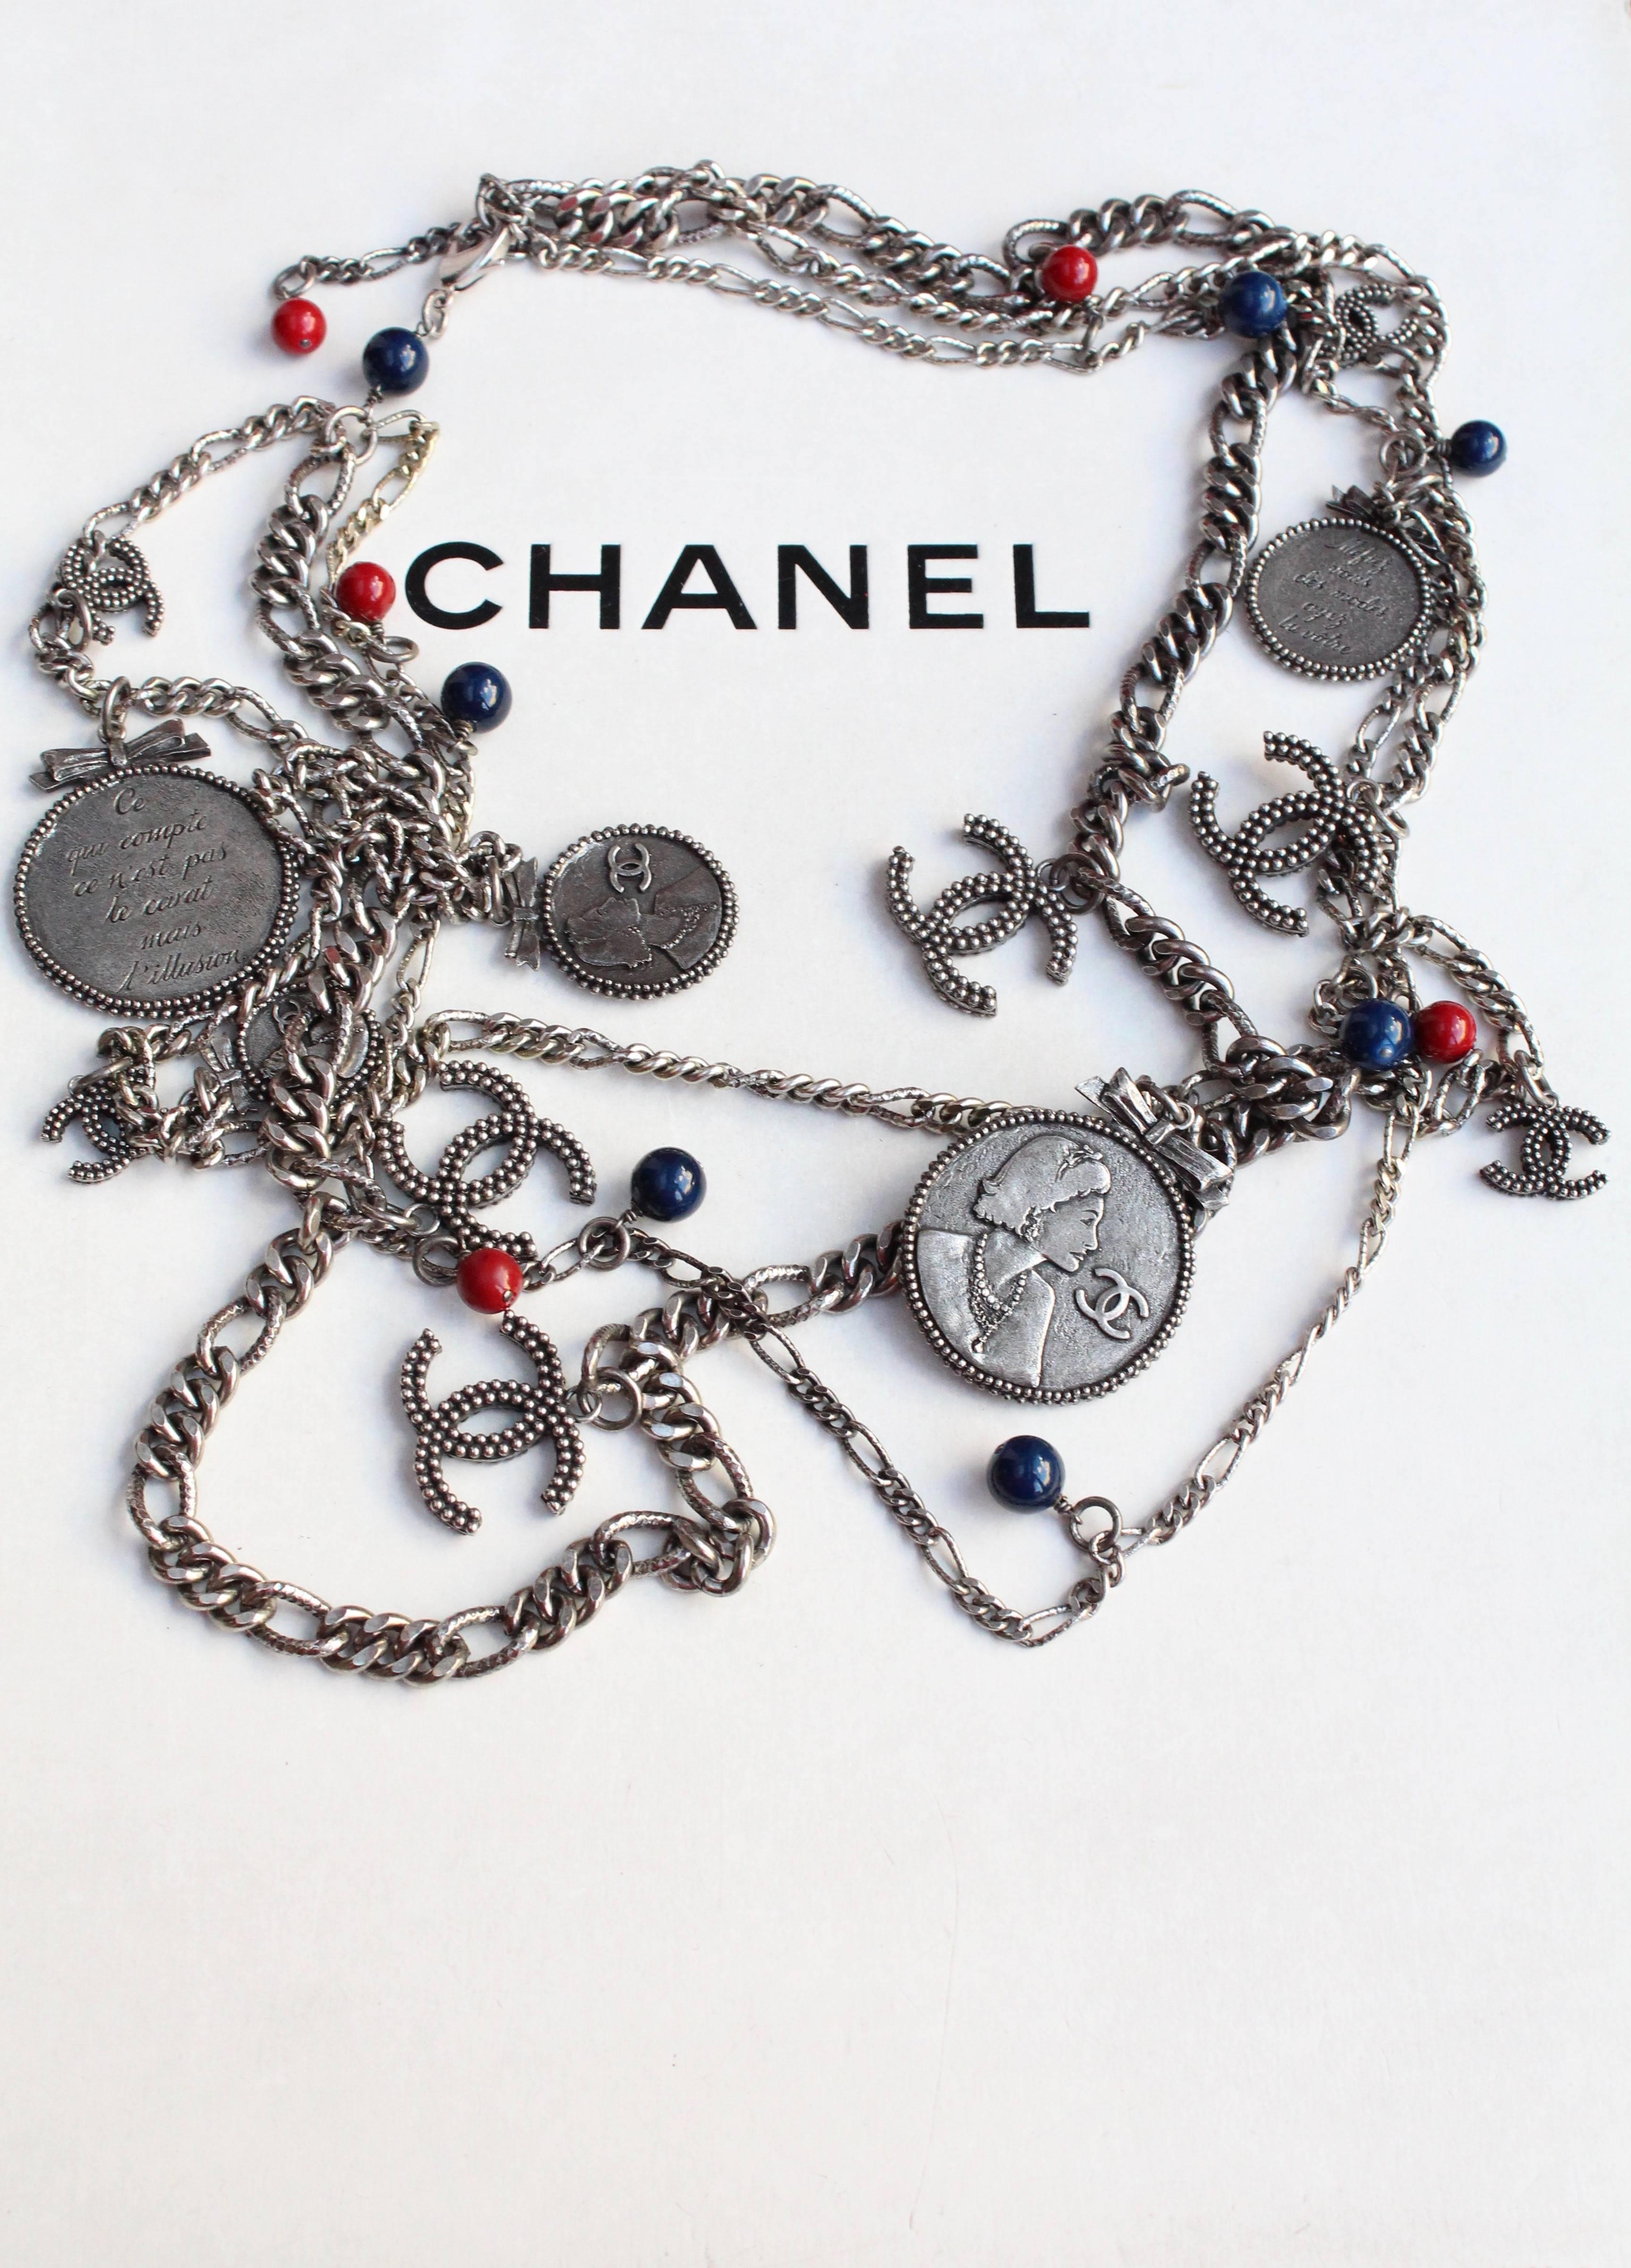 CHANEL (Made in France) Long necklace comprised of three strands of rhodium plated metal chain with dangling silver tone medals topped with a small bow, silver tone CC logos and red and blue glass beads.

The round medals feature on one side a